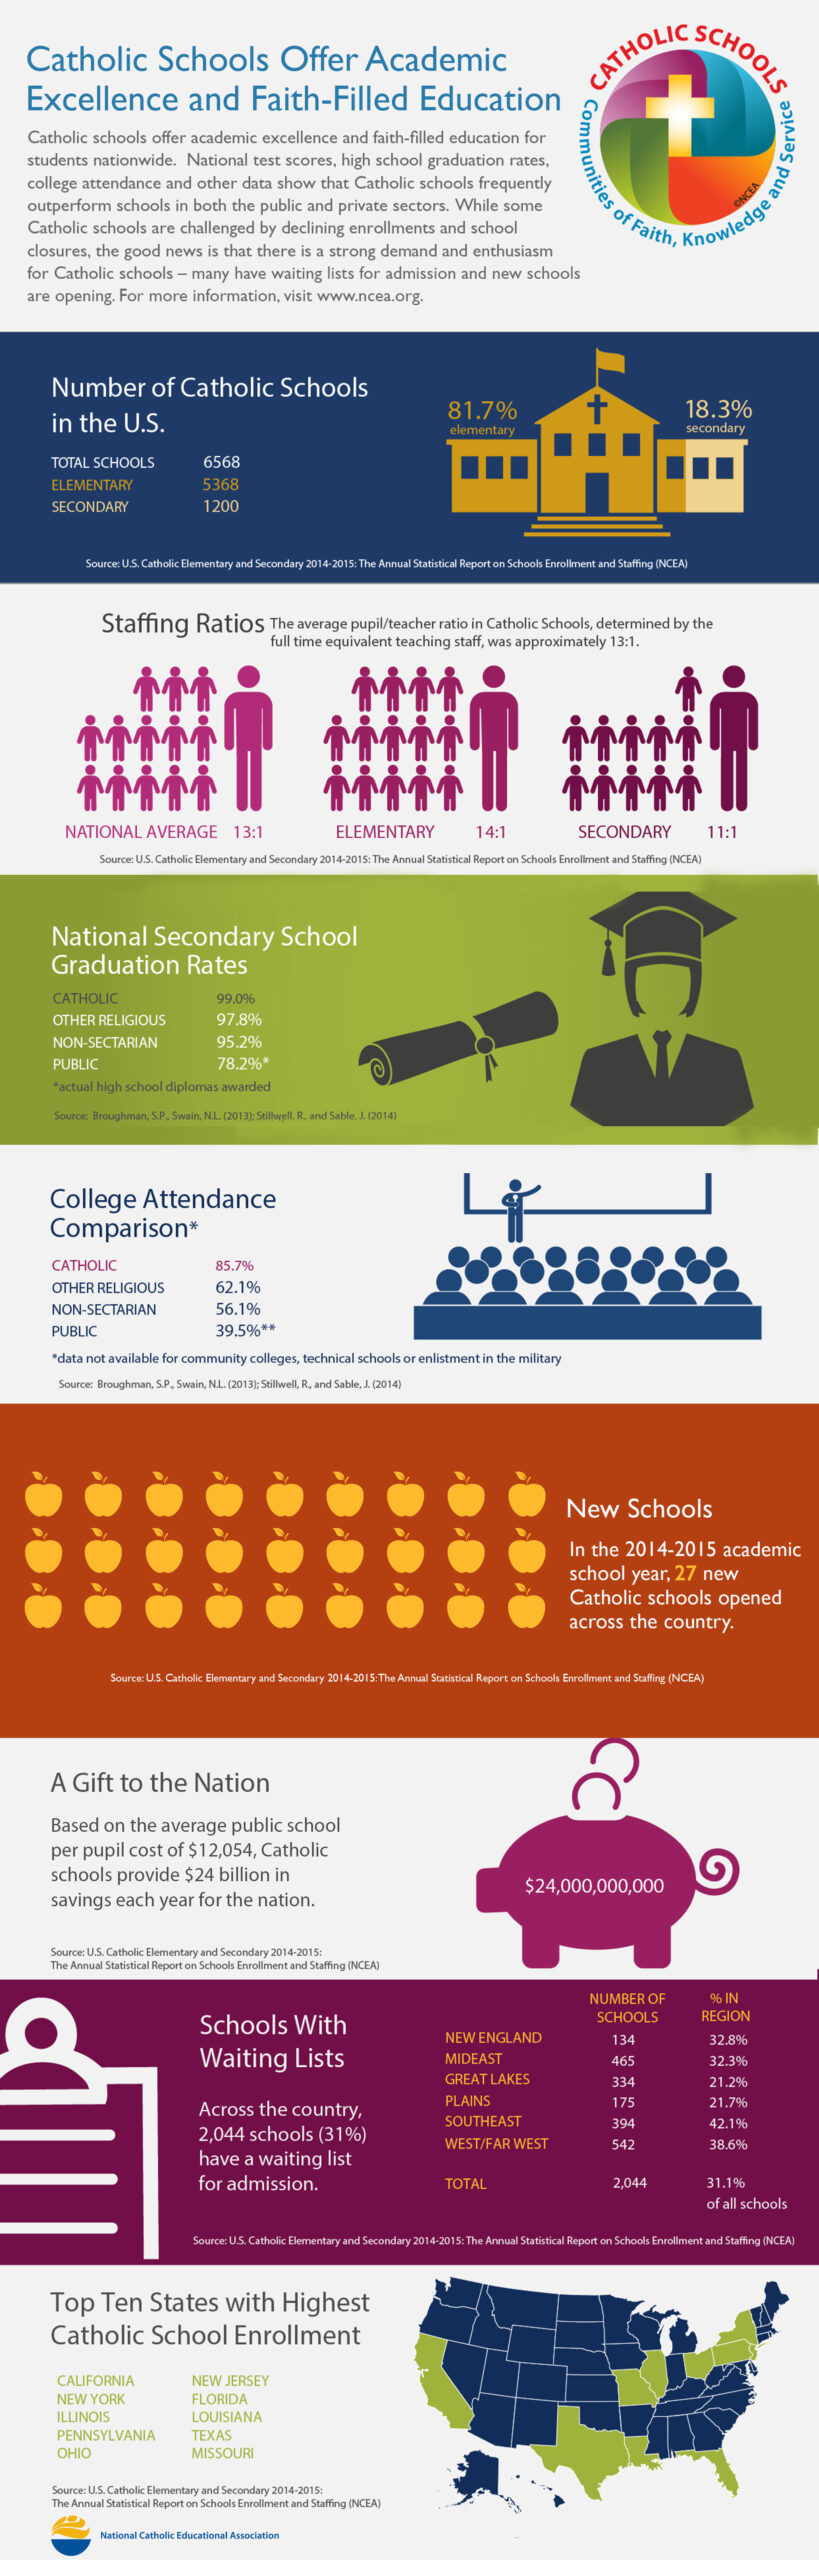 infographic with statistics about Catholic schools in the U.S.